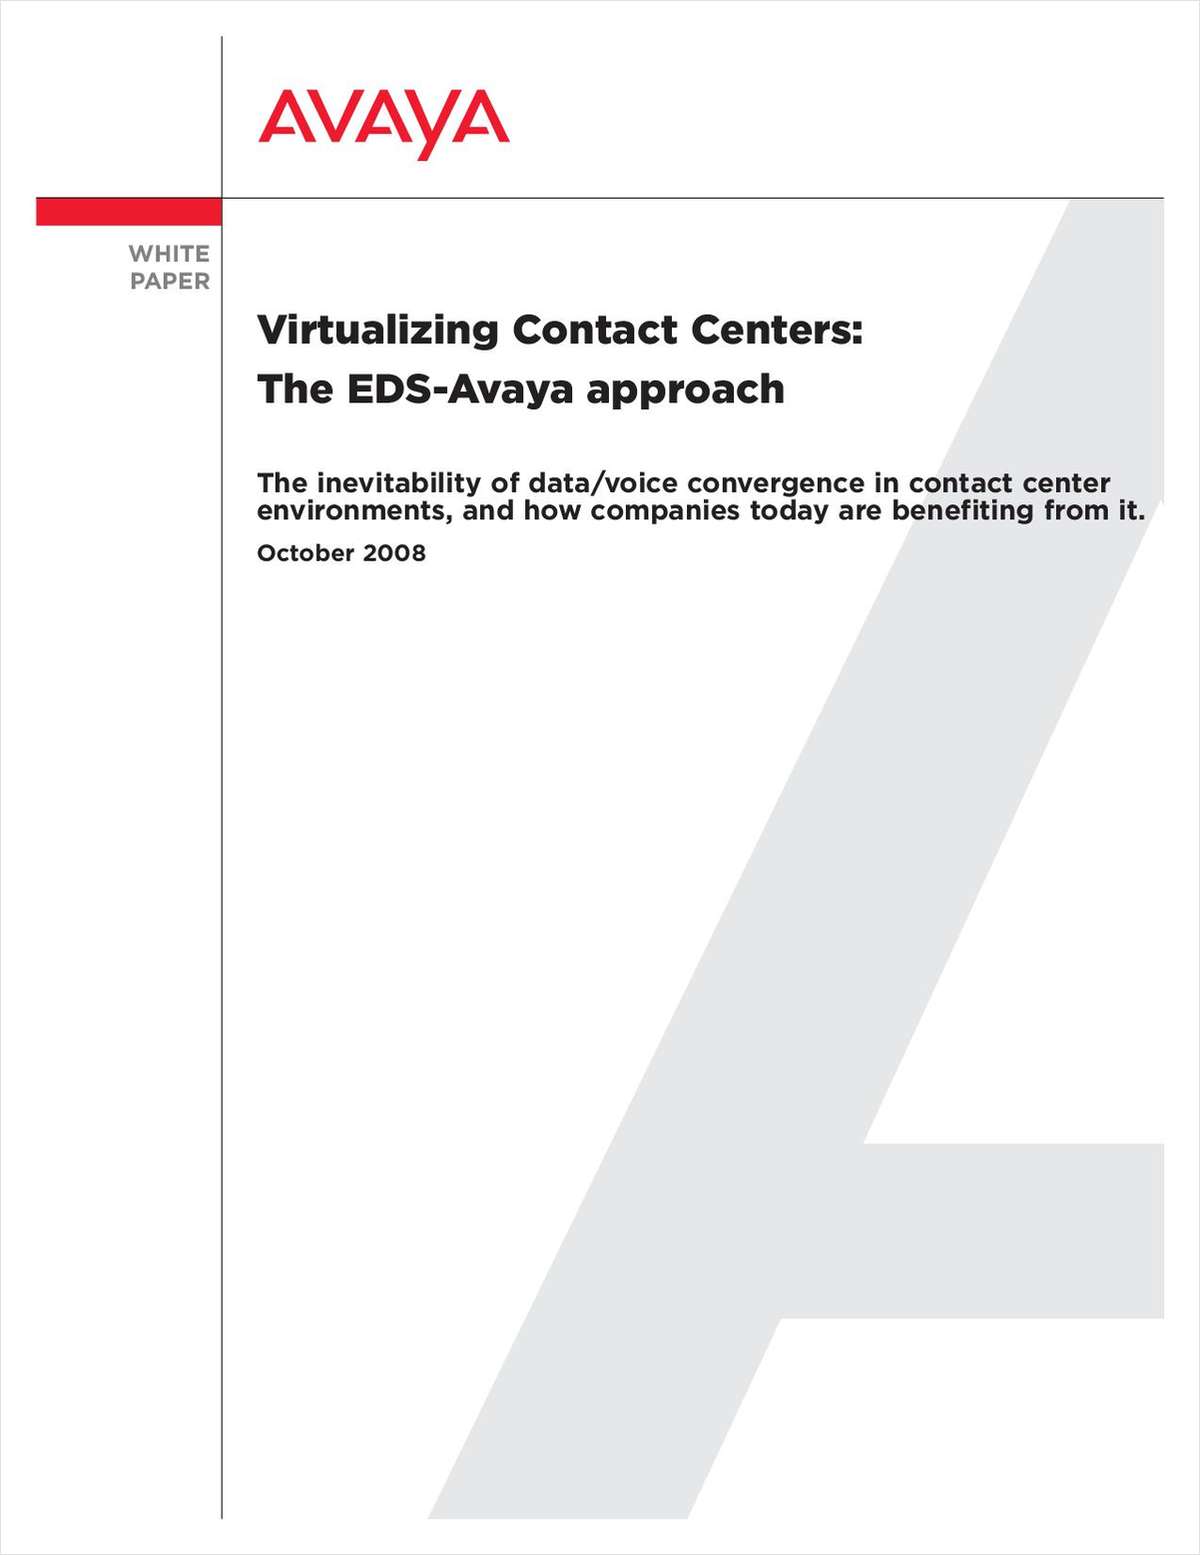 Maximize Your IT Investment: The Avaya/EDS Virtualized Contact Center Model